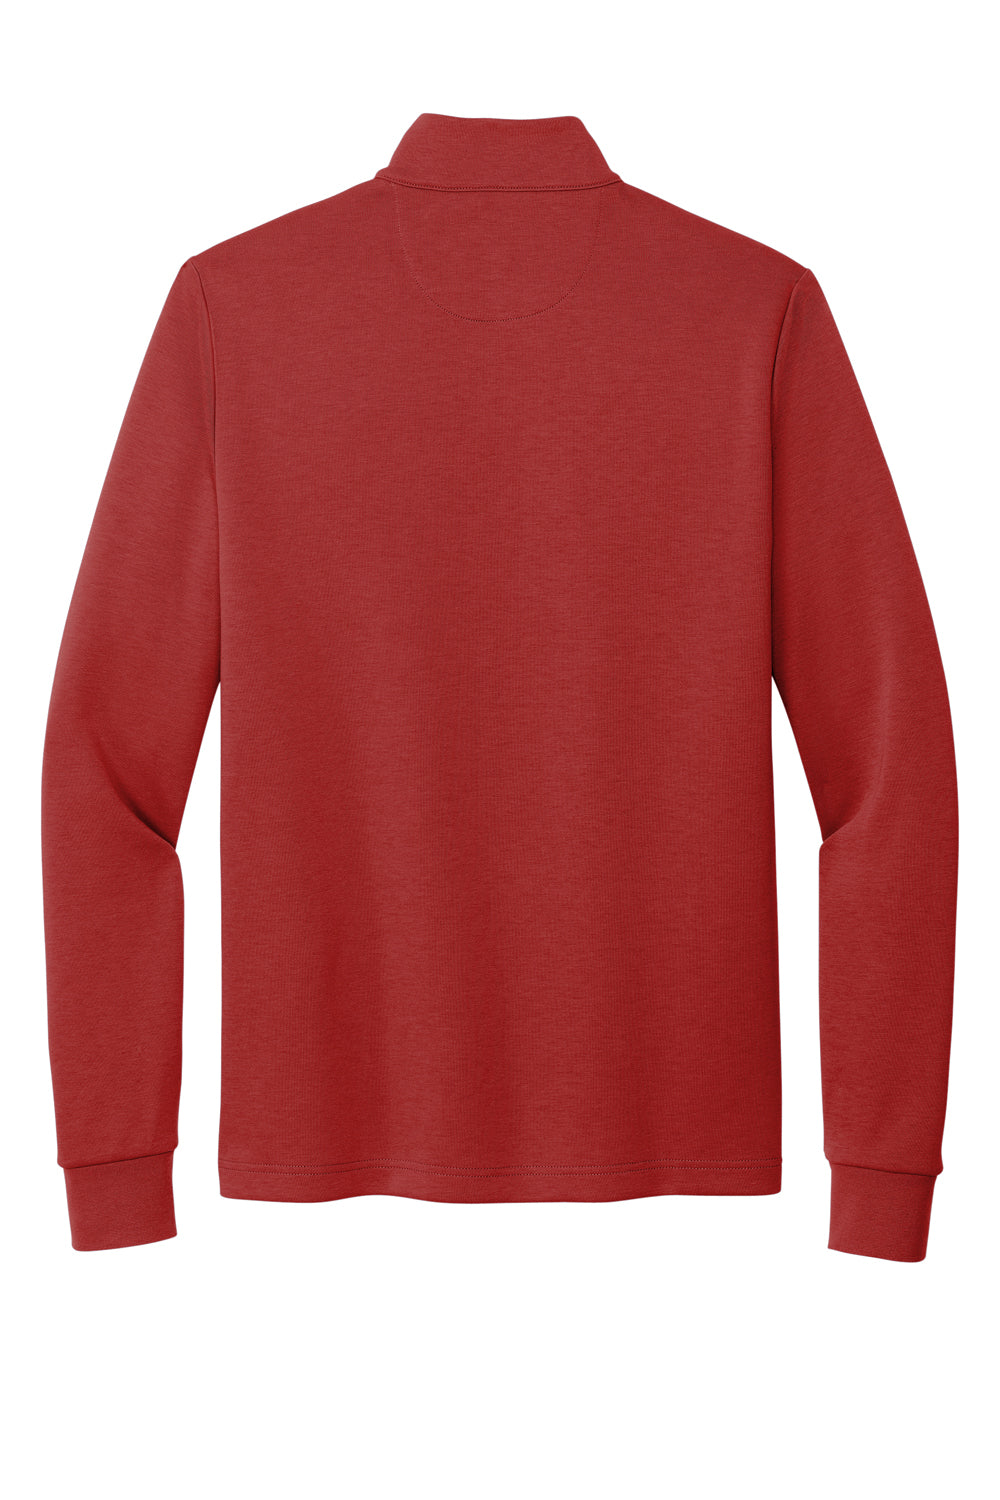 Brooks Brothers Mens Double Knit 1/4 Zip Sweatshirt Rich Red Flat Back